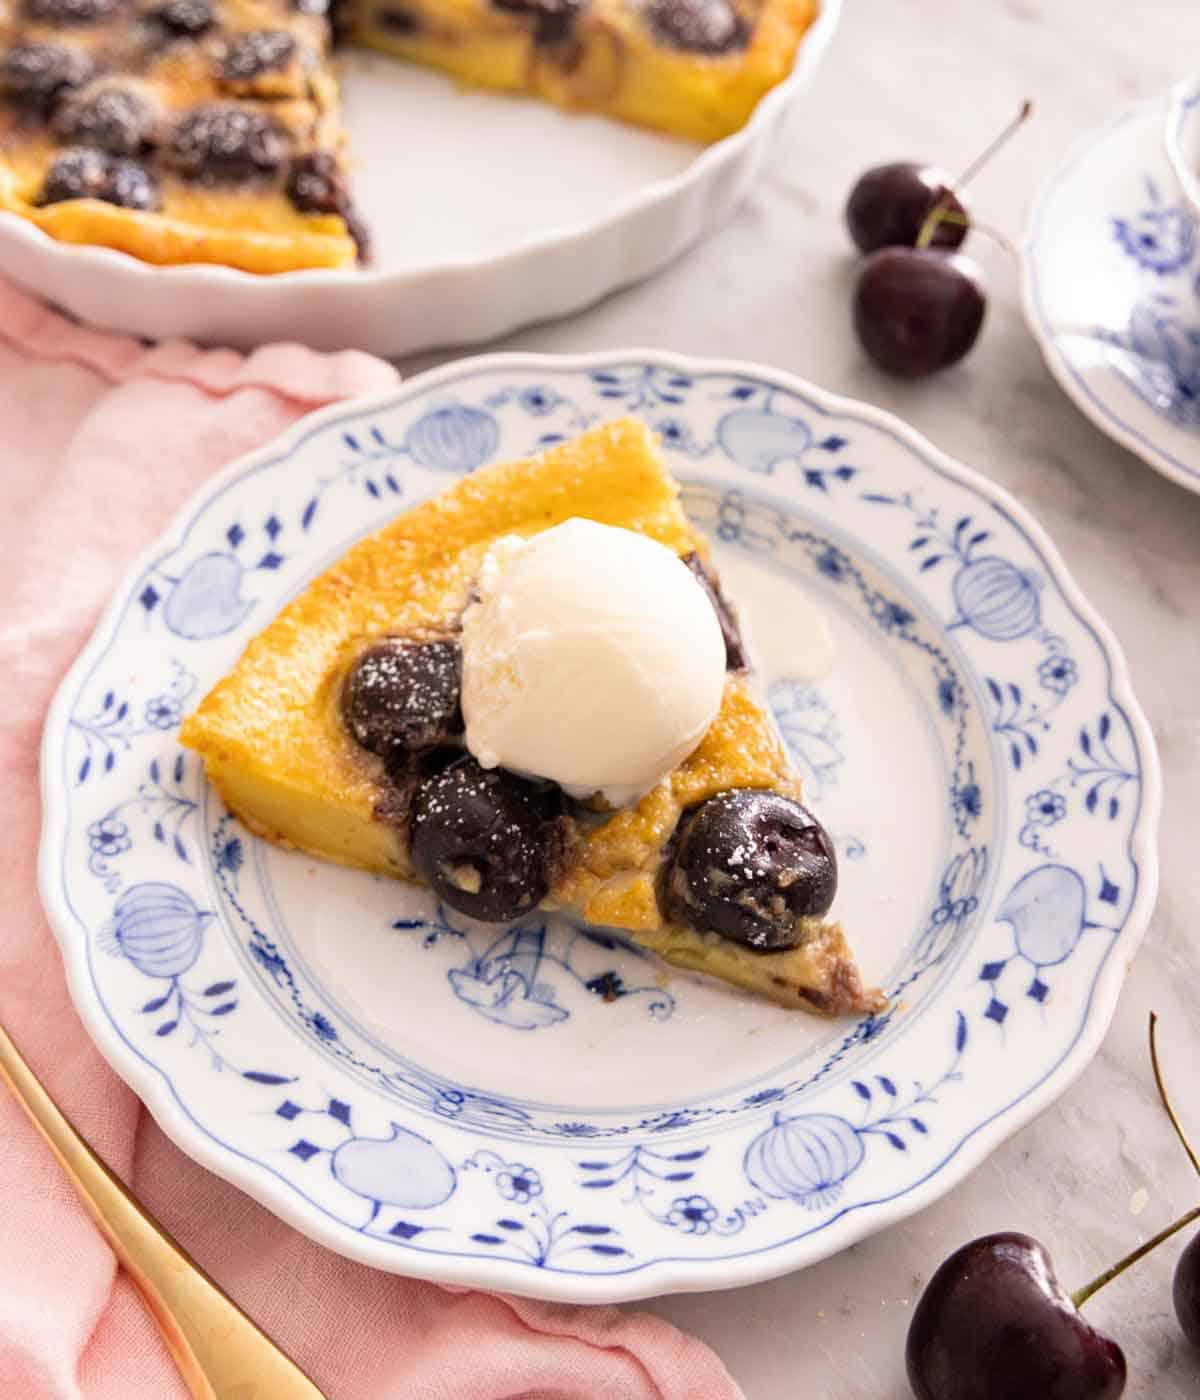 A slice of clafoutis with vanilla ice cream on top.